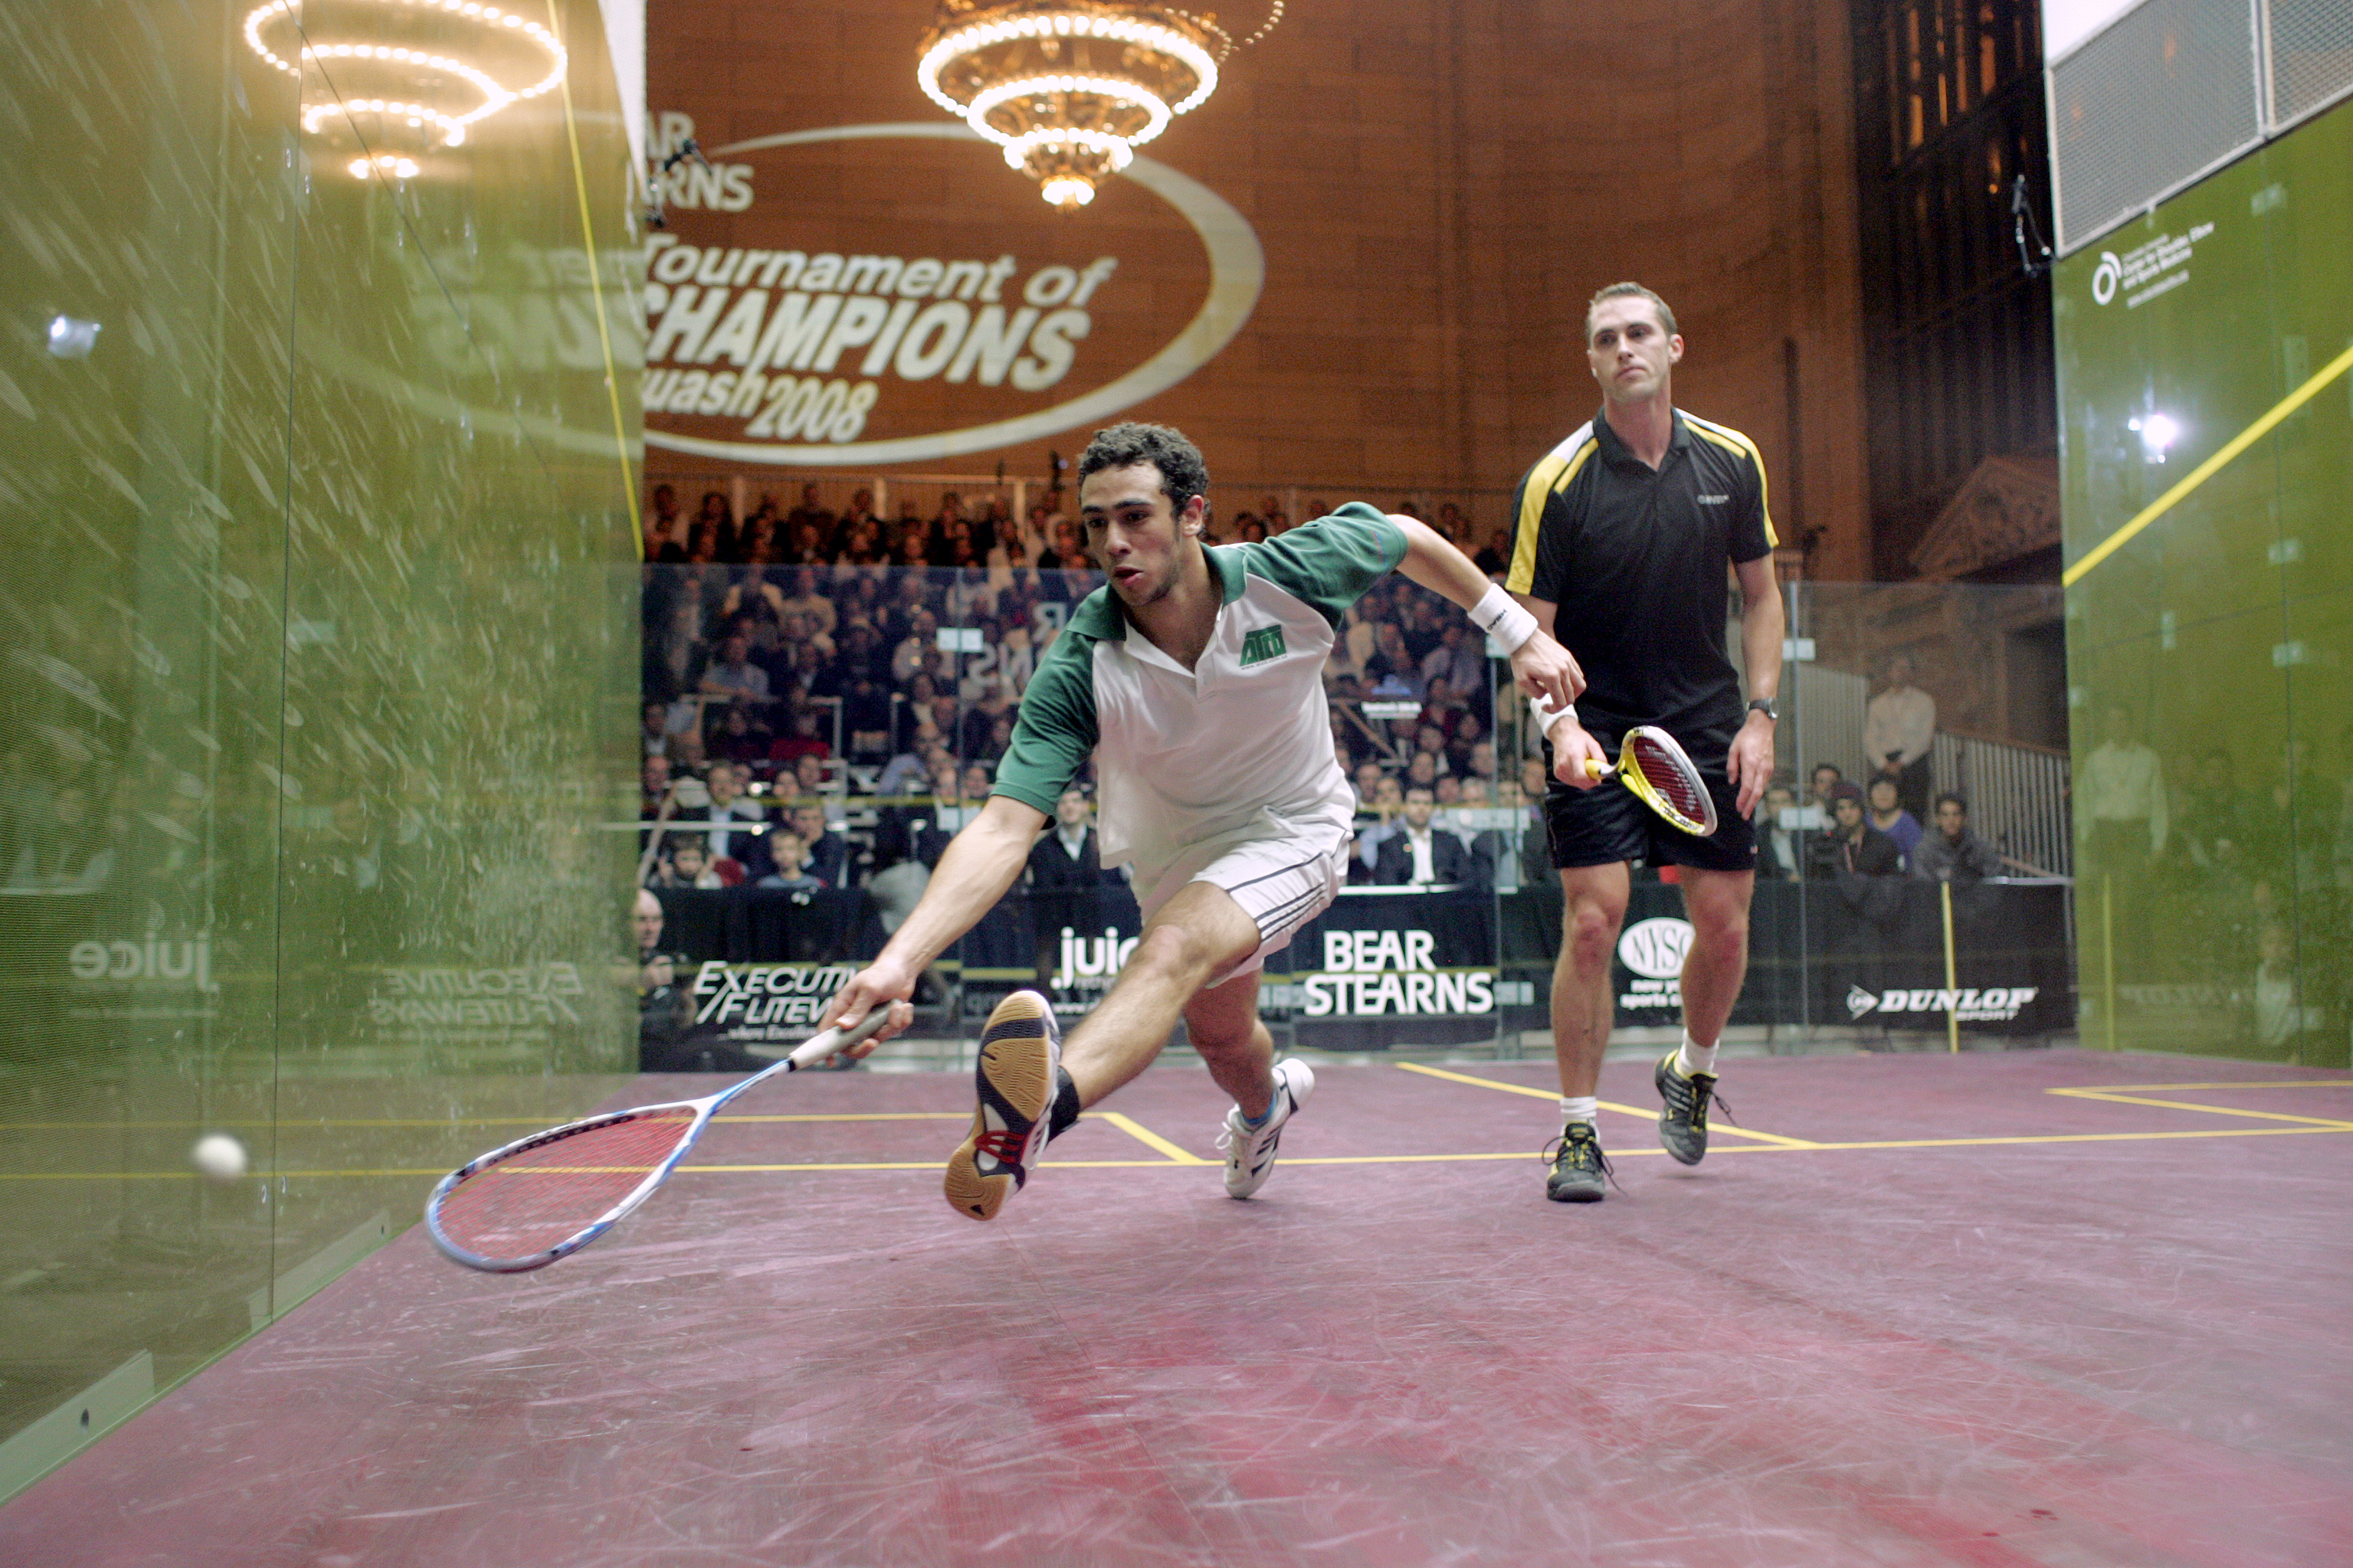 Ramy Ashour (in green), the 2009 JP Morgan Tournament of Champions will be his encore after winning it last year. He’s currently ranked World No. 3.